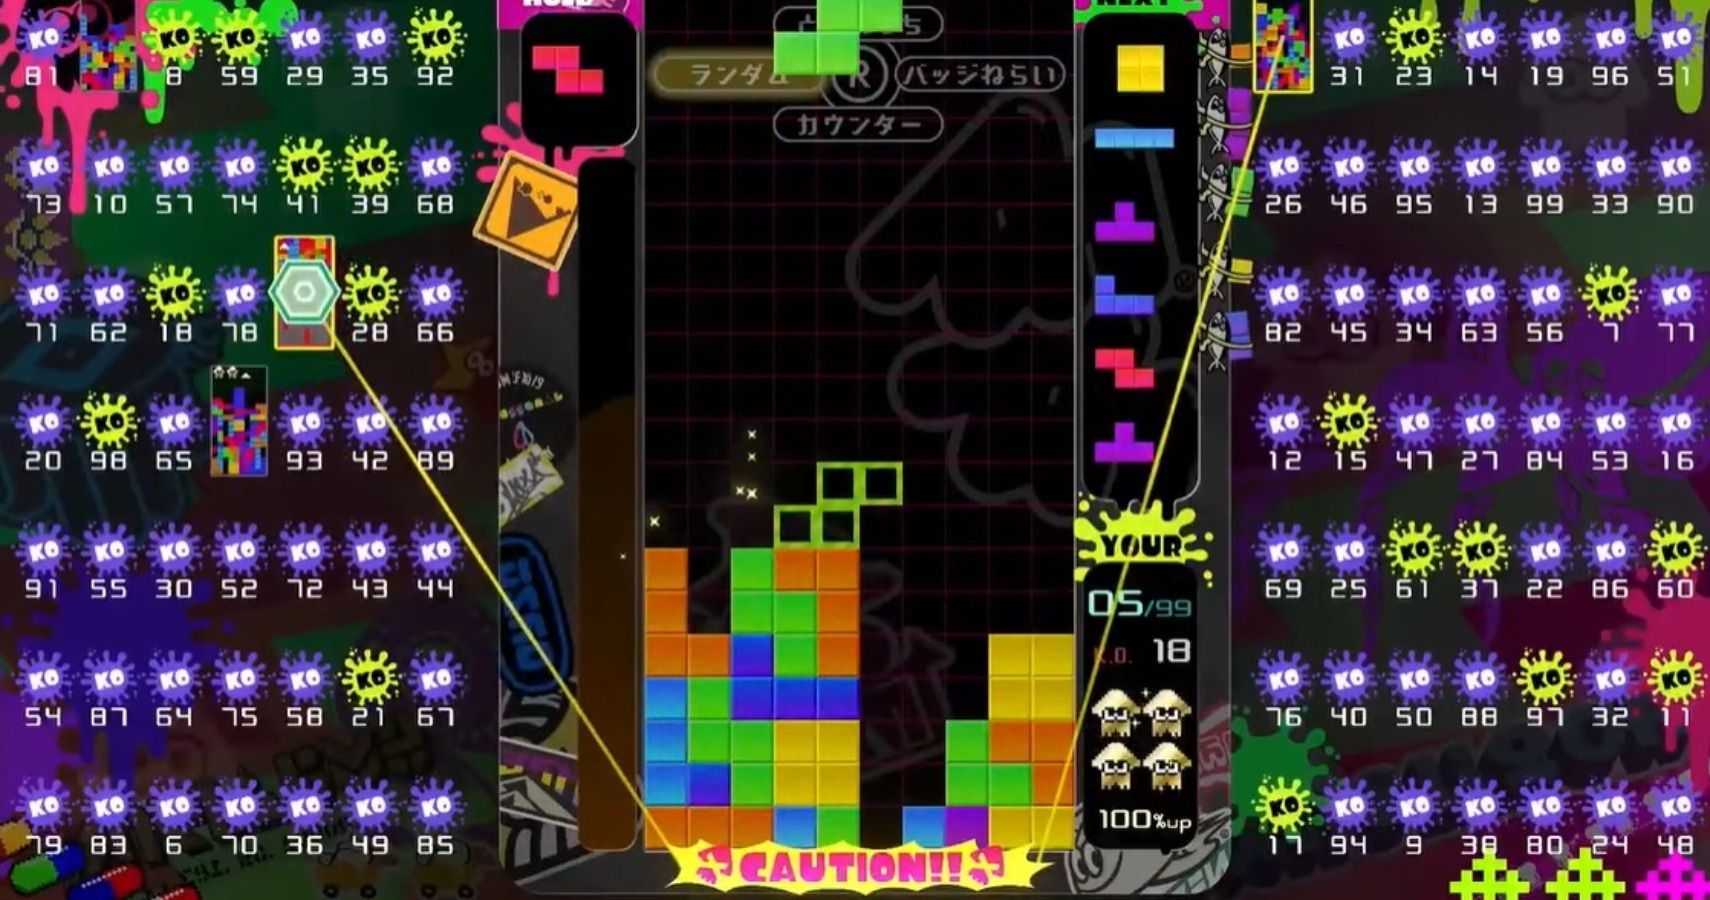 The Next Tetris 99 Event Has A Splatoon 2 Stage That Players Can Win